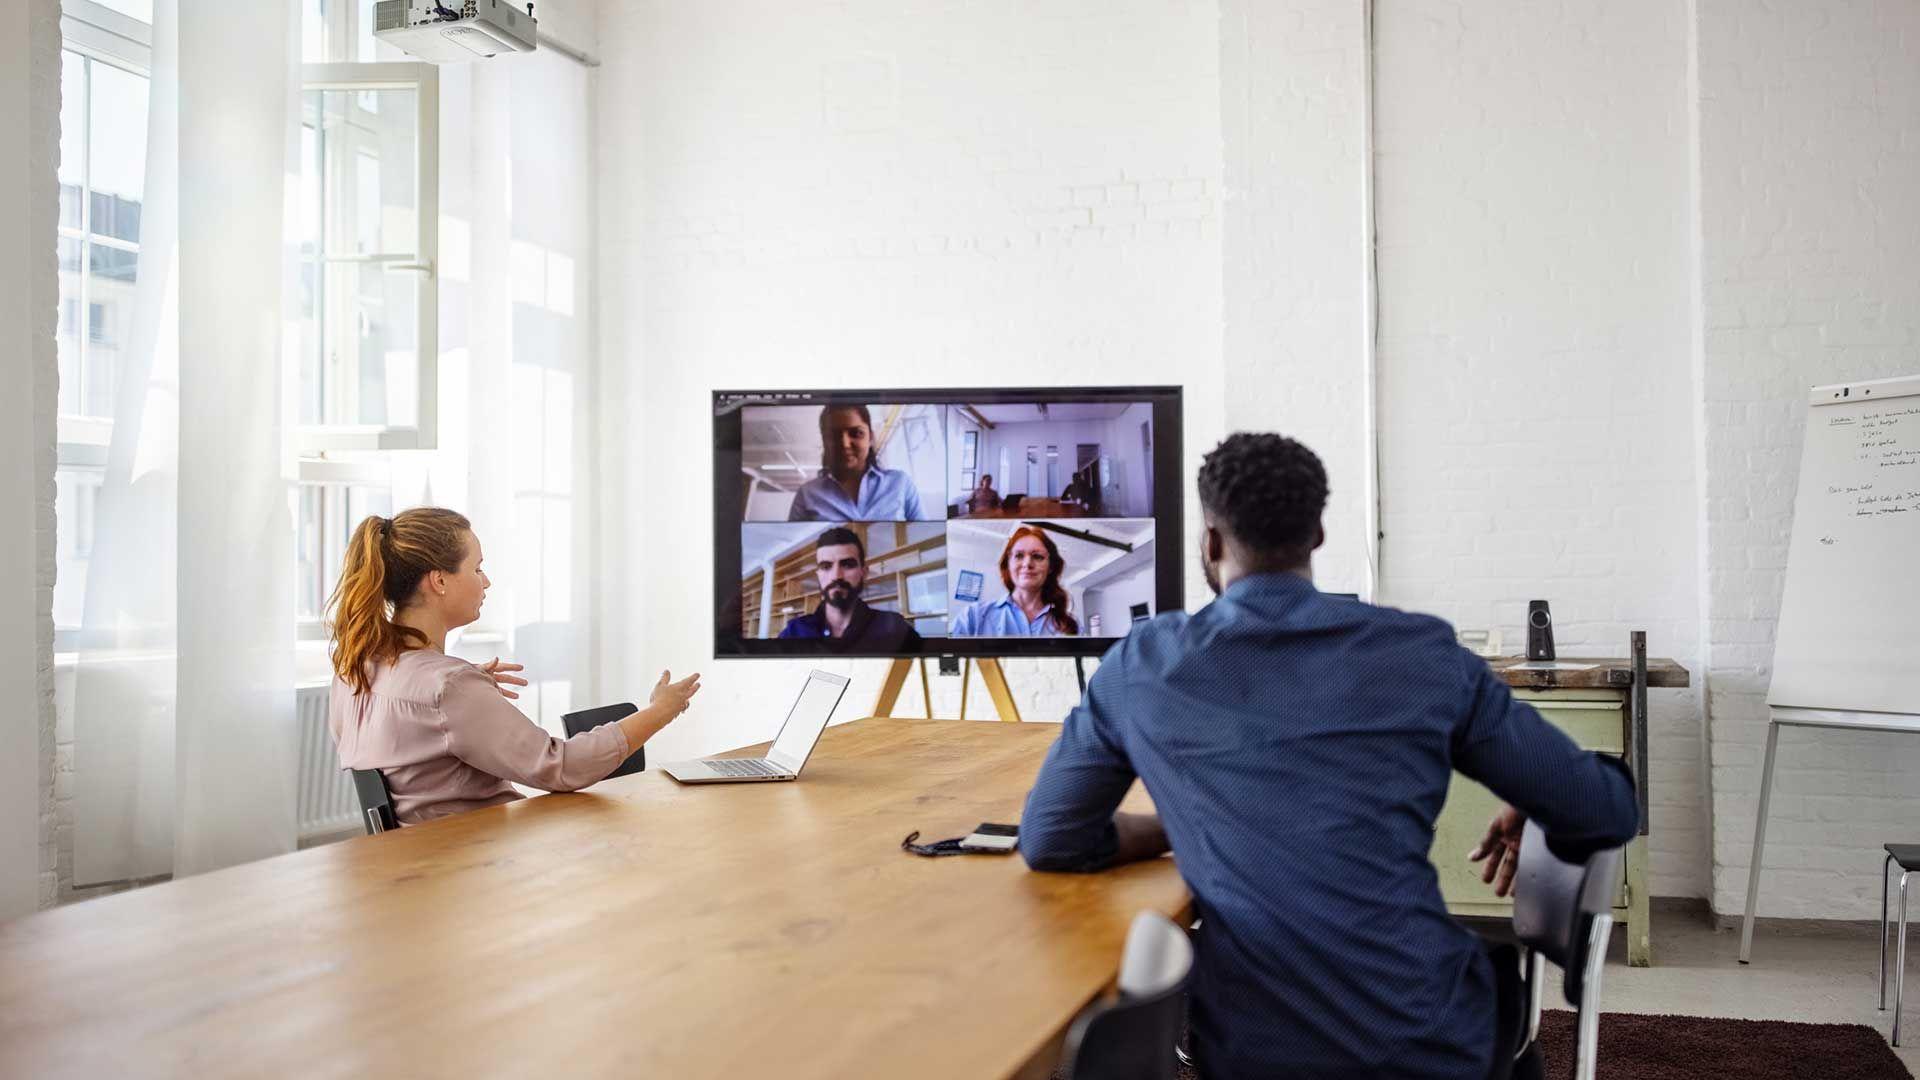 People in a video conference